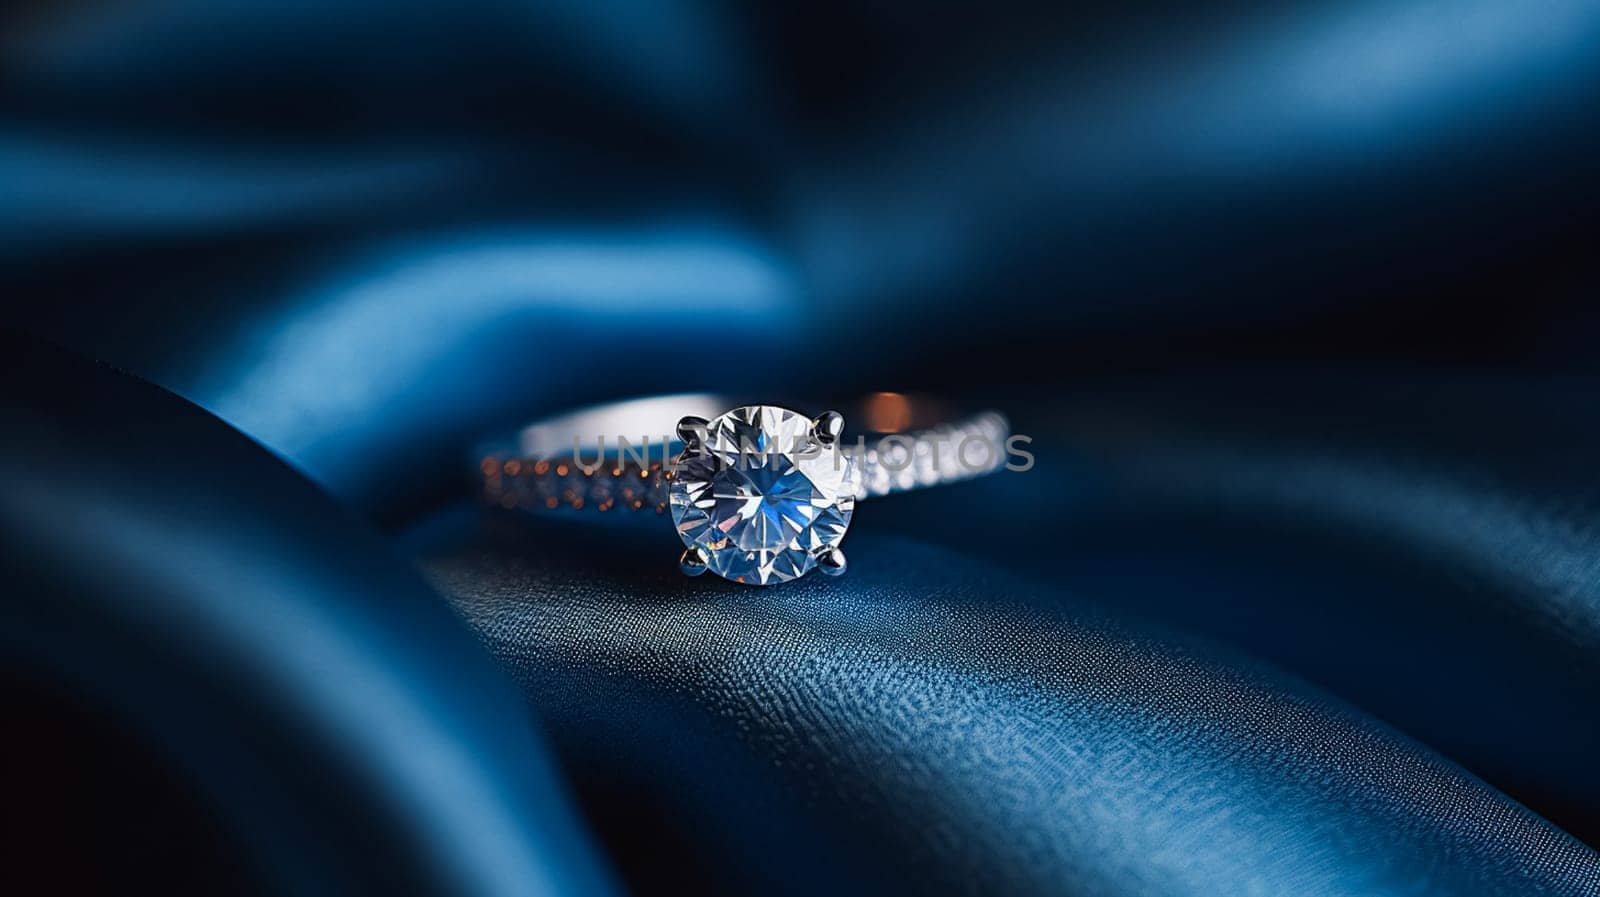 Jewellery, proposal and holiday gift, diamond engagement ring on blue silk fabric, symbol of love, romance and commitment inspiration